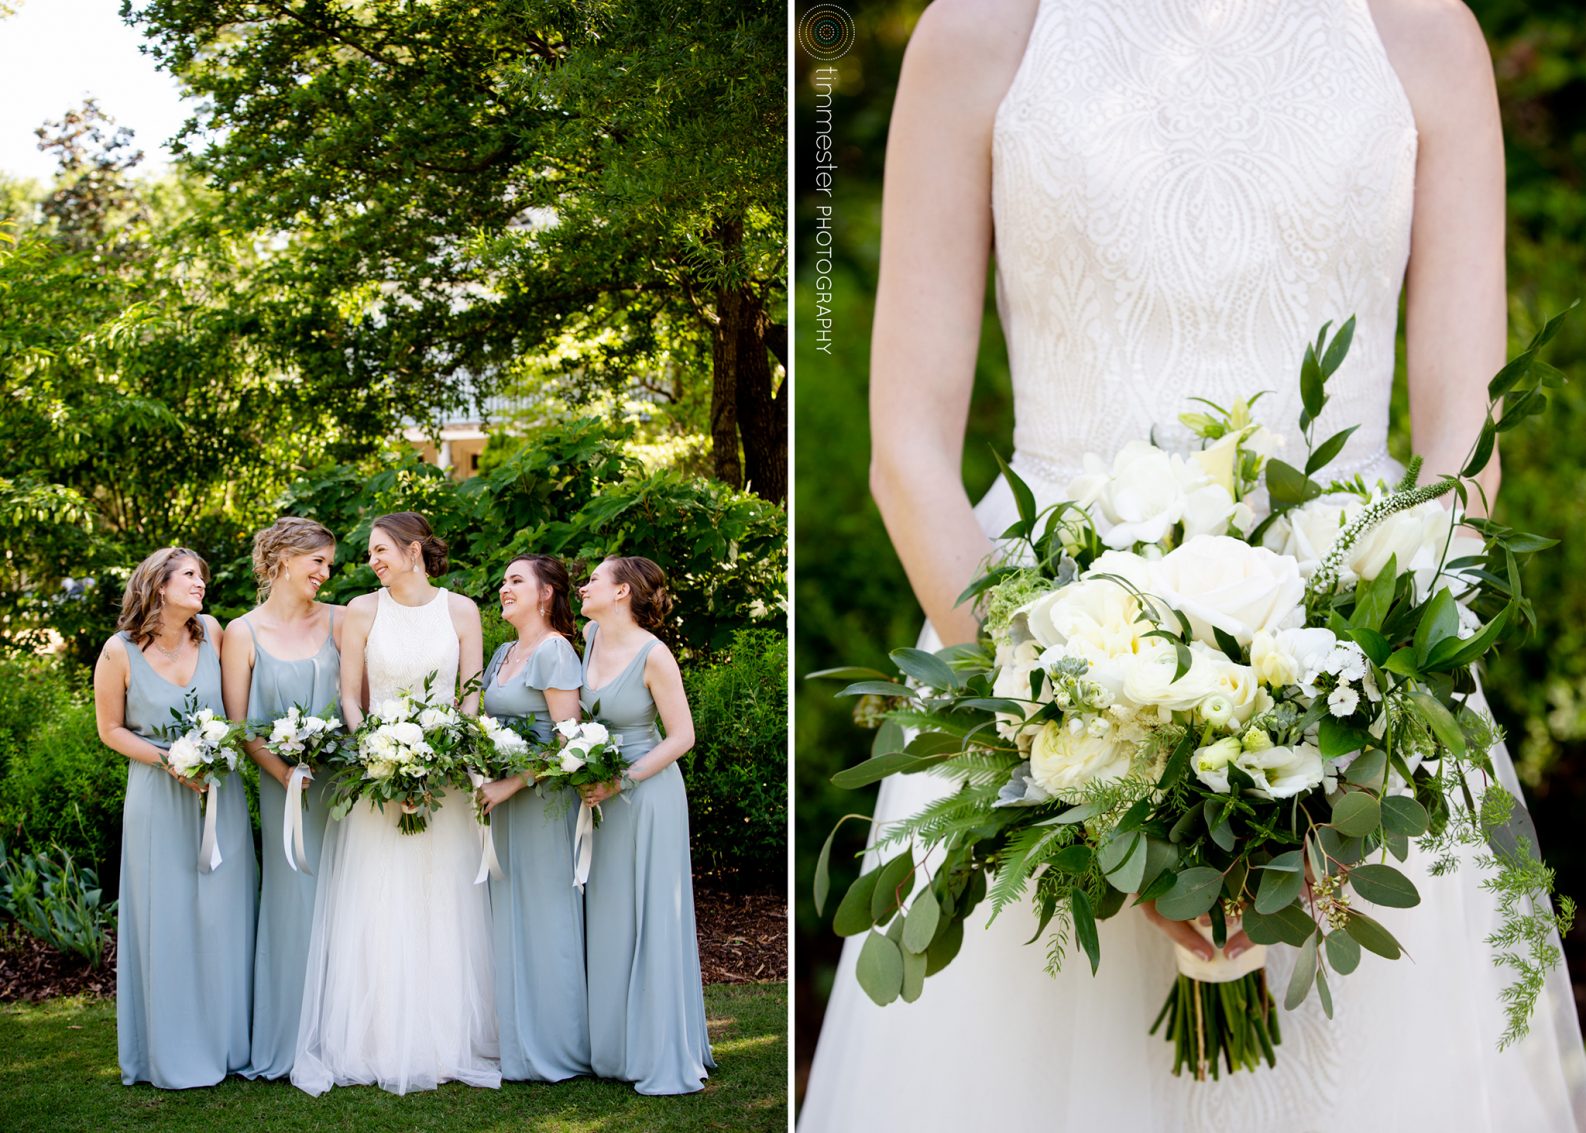 A beautiful bride and bridesmaids for Sarah's outdoor garden wedding in Raleigh at Fred Fletcher Park.